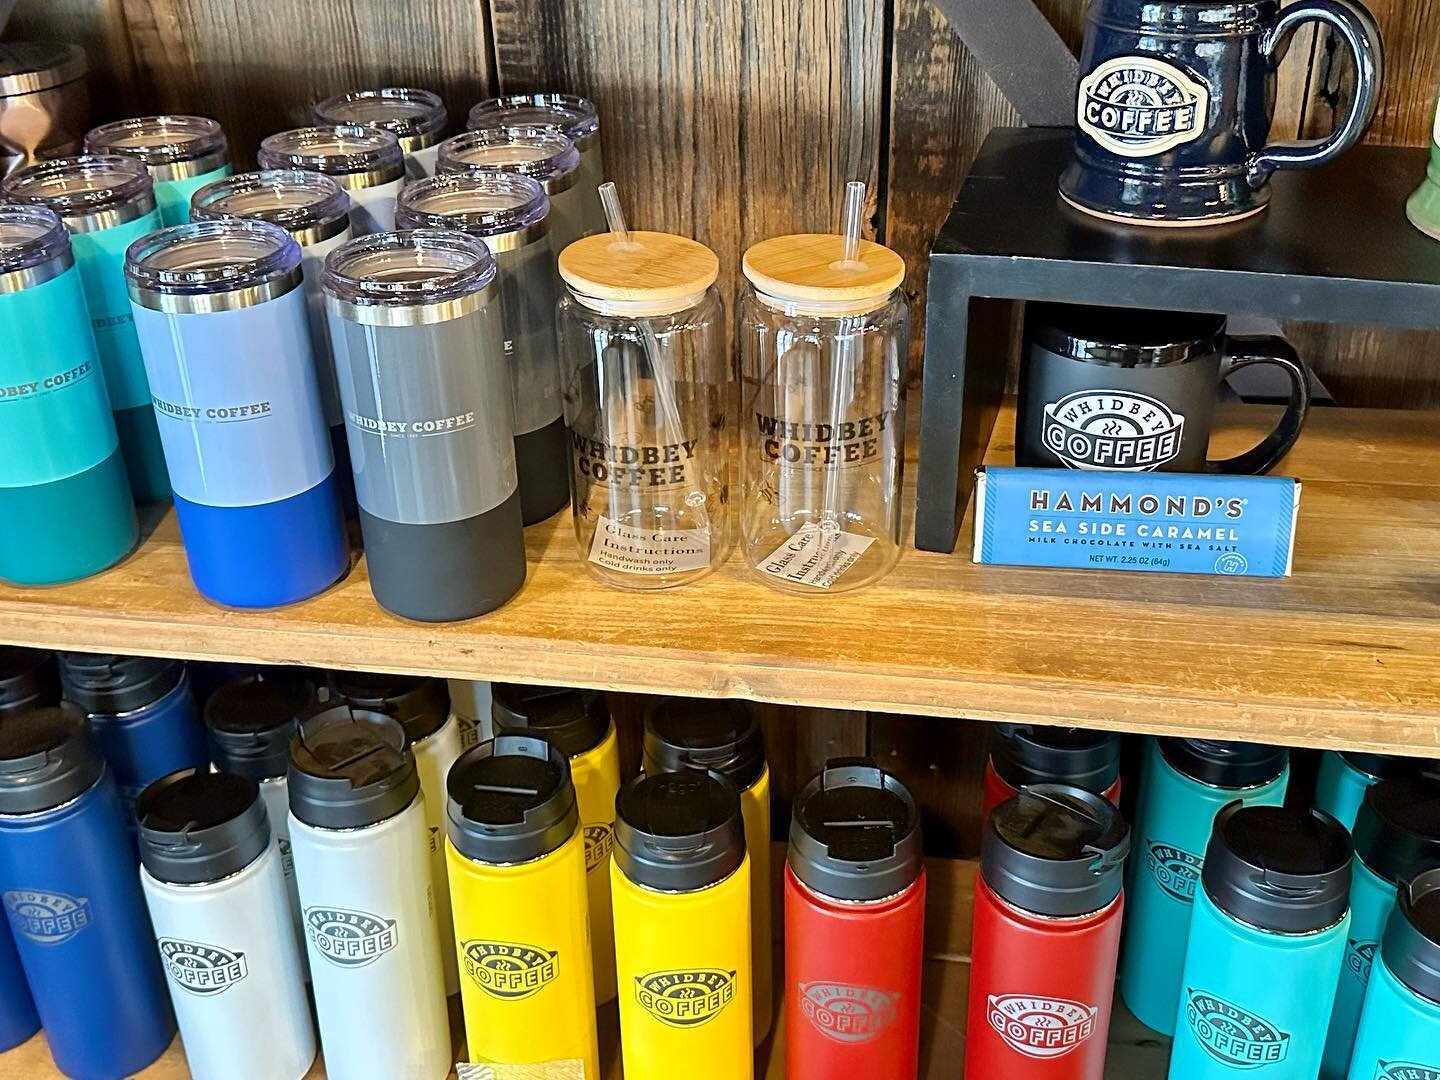 It&rsquo;s great to see our stuff out in public! We love working with @whidbeycoffee  go grab a drink and check out our 16oz glass cups at any Whidbey Coffee location!
#blockhousemarket #whidbeycoffee #glasscups #localbusiness #localsupportinglocal #